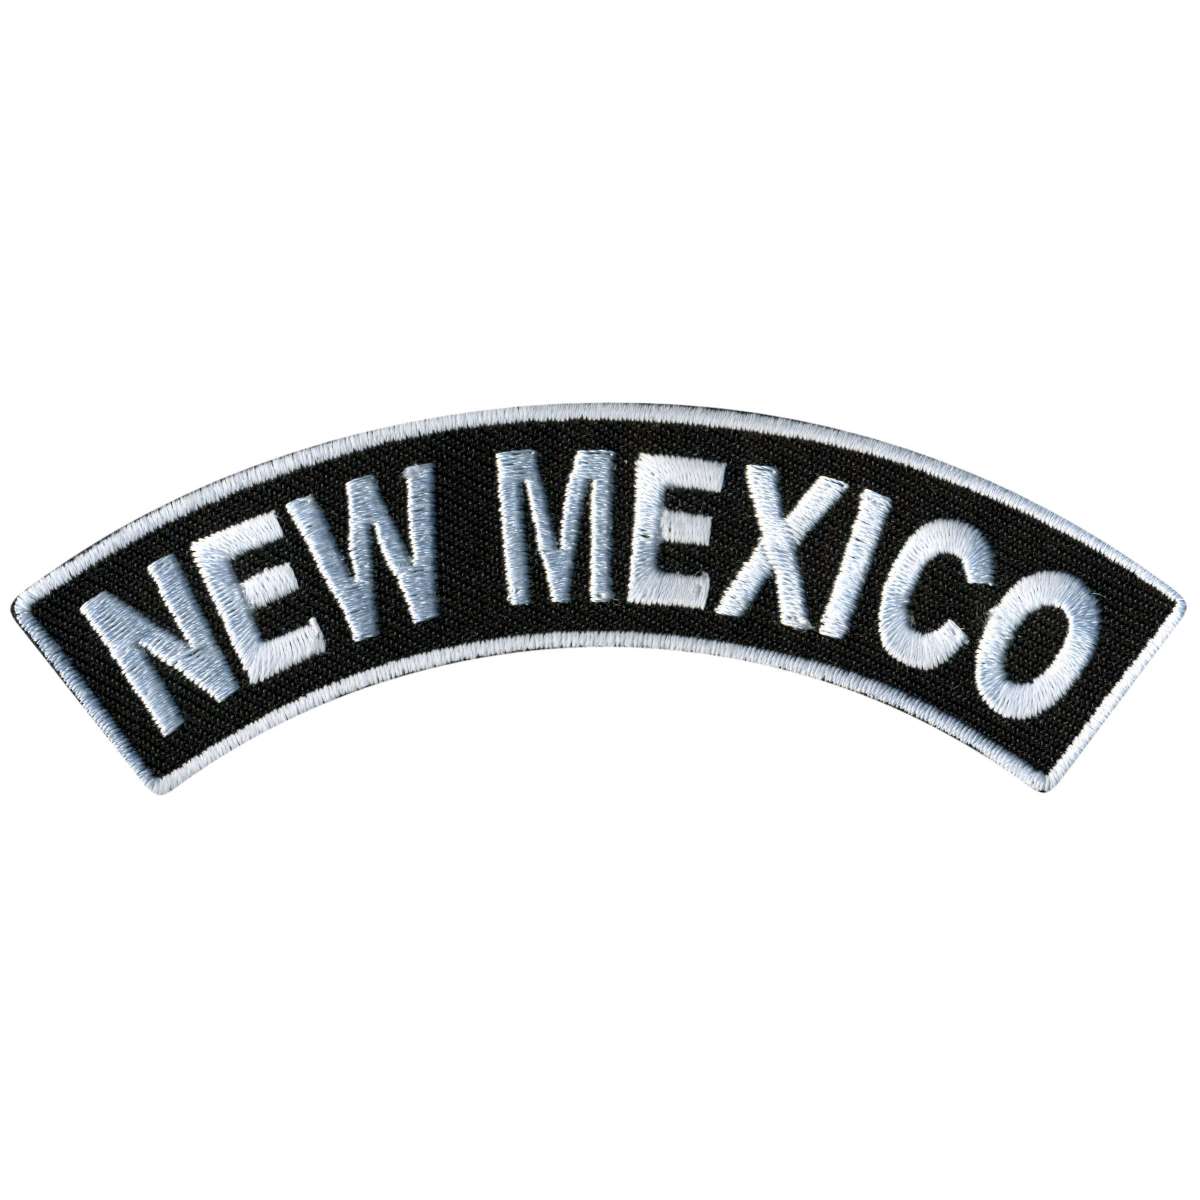 Hot Leathers New Mexico  4” X 1” Top Rocker Patch PPM4062